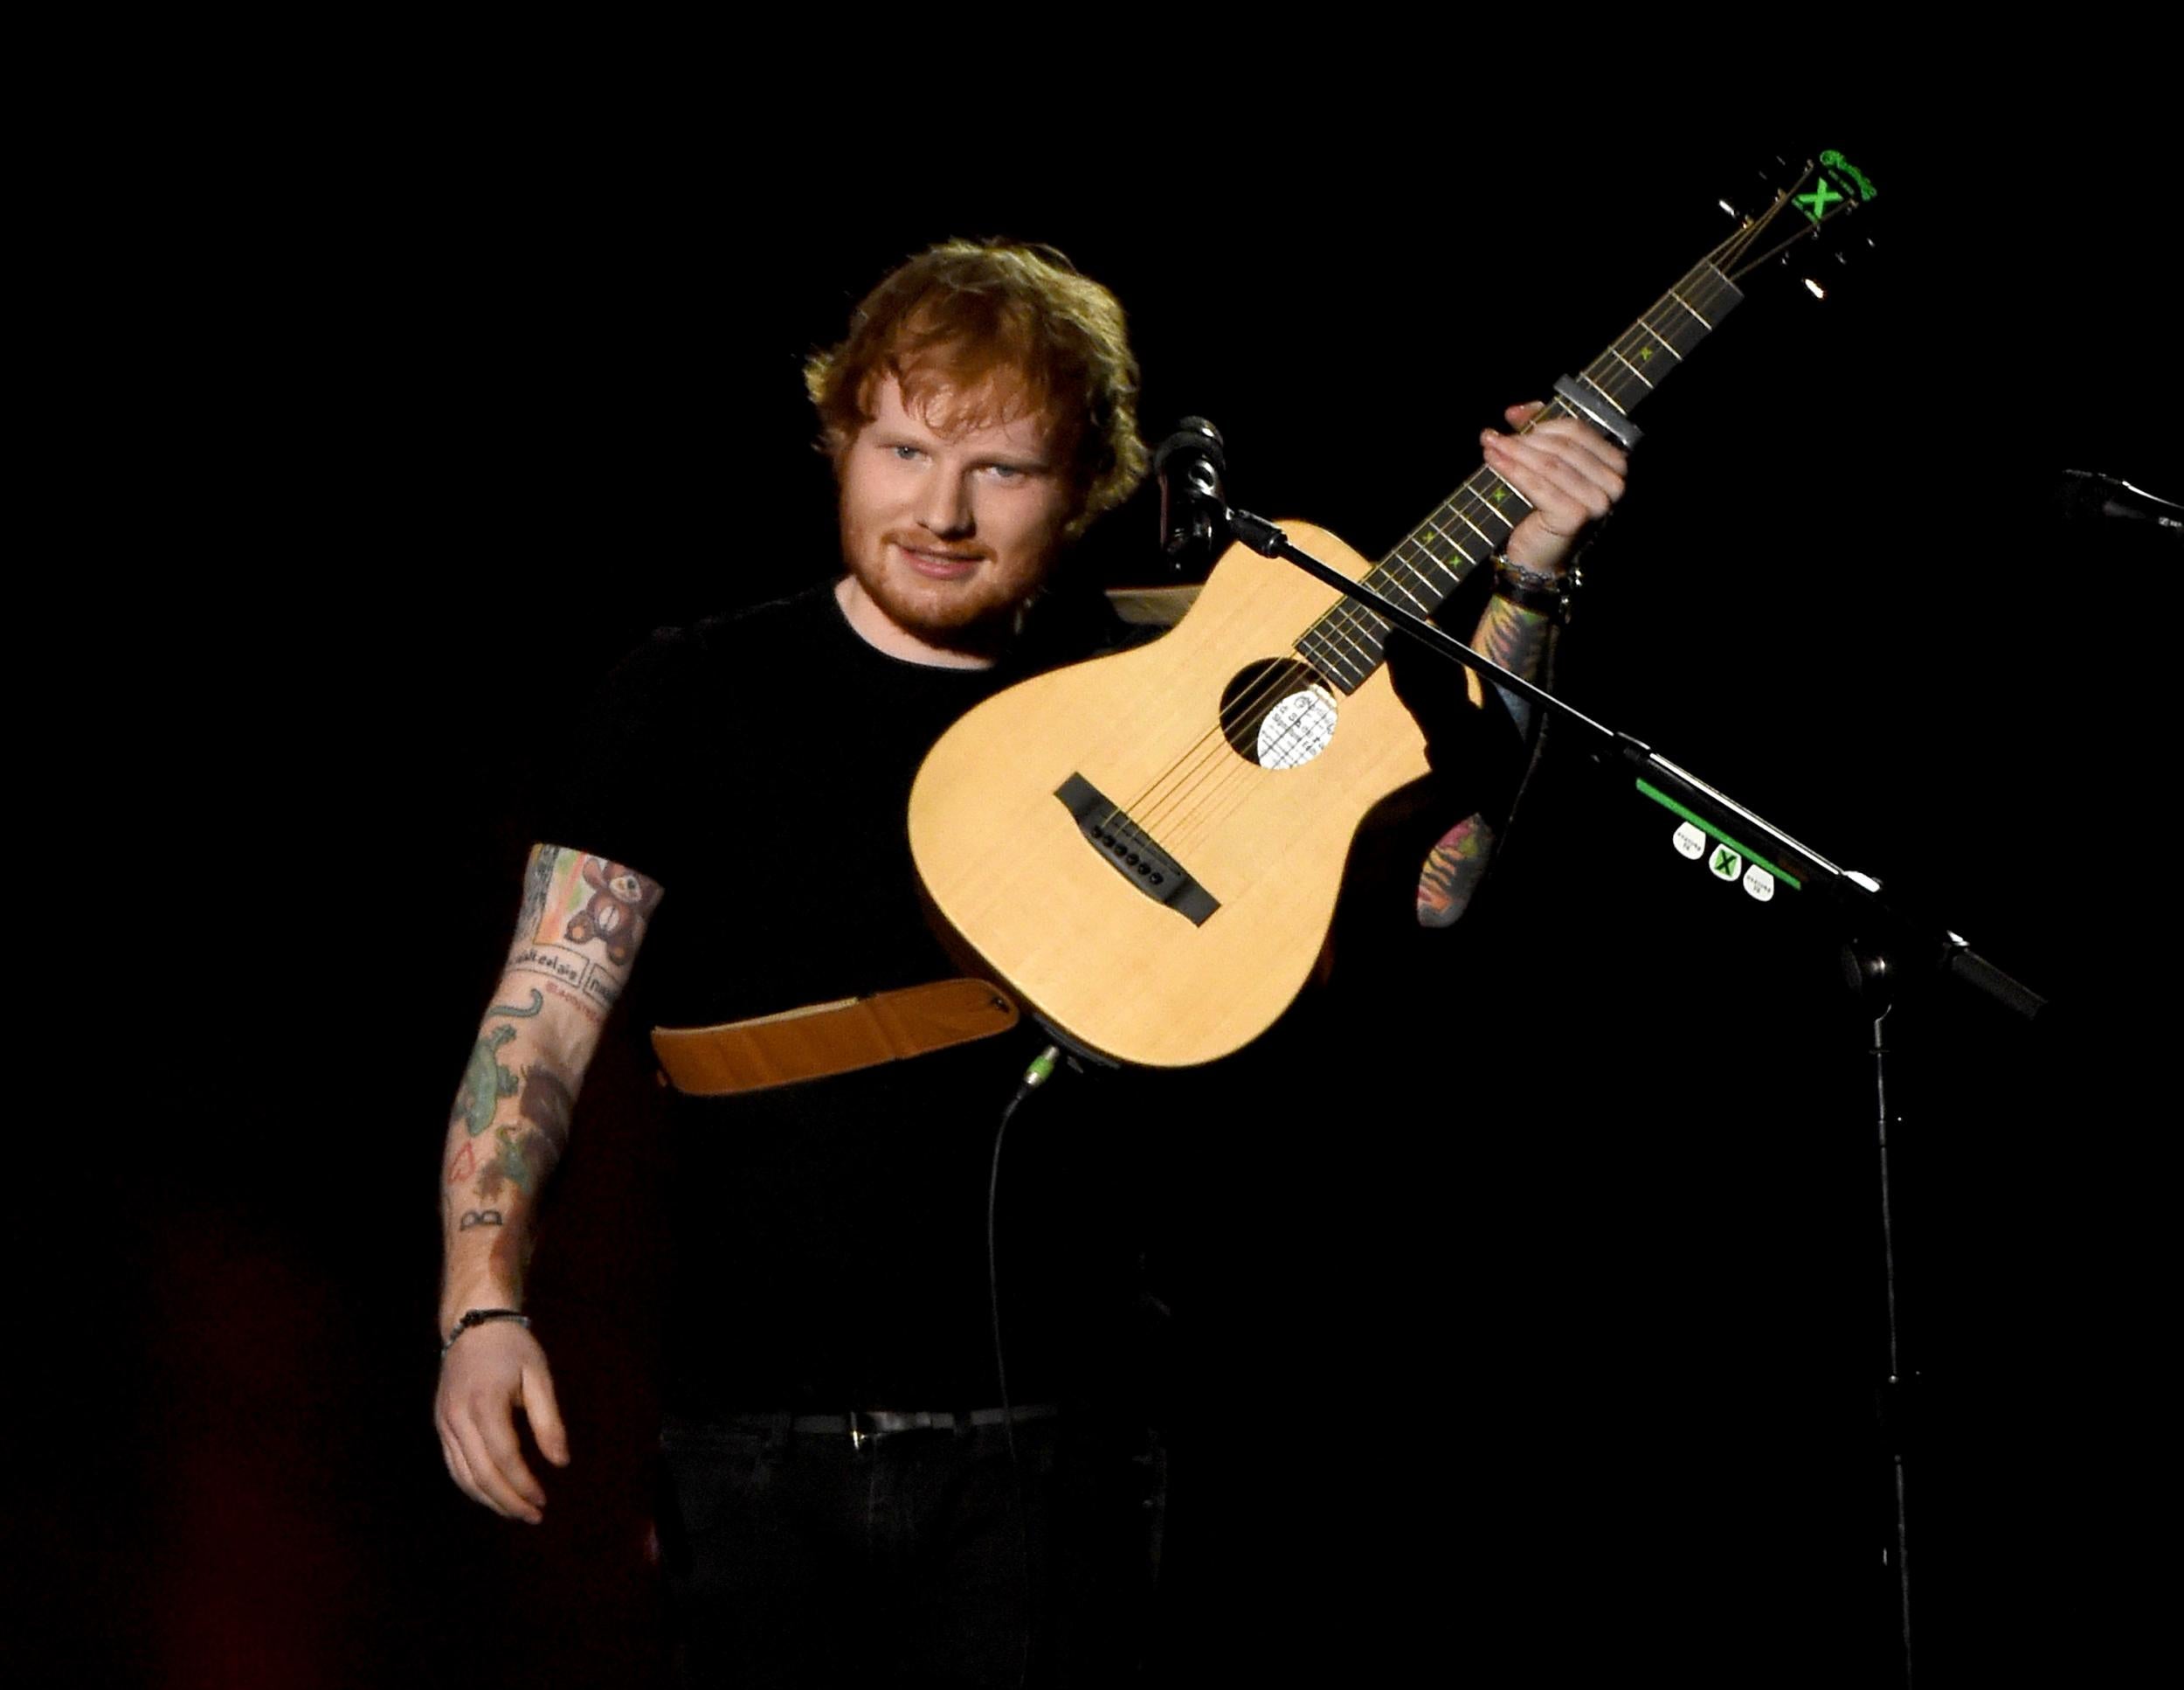 The source says Sheeran was taken to a nearby hospital to have stitches before returning to the party